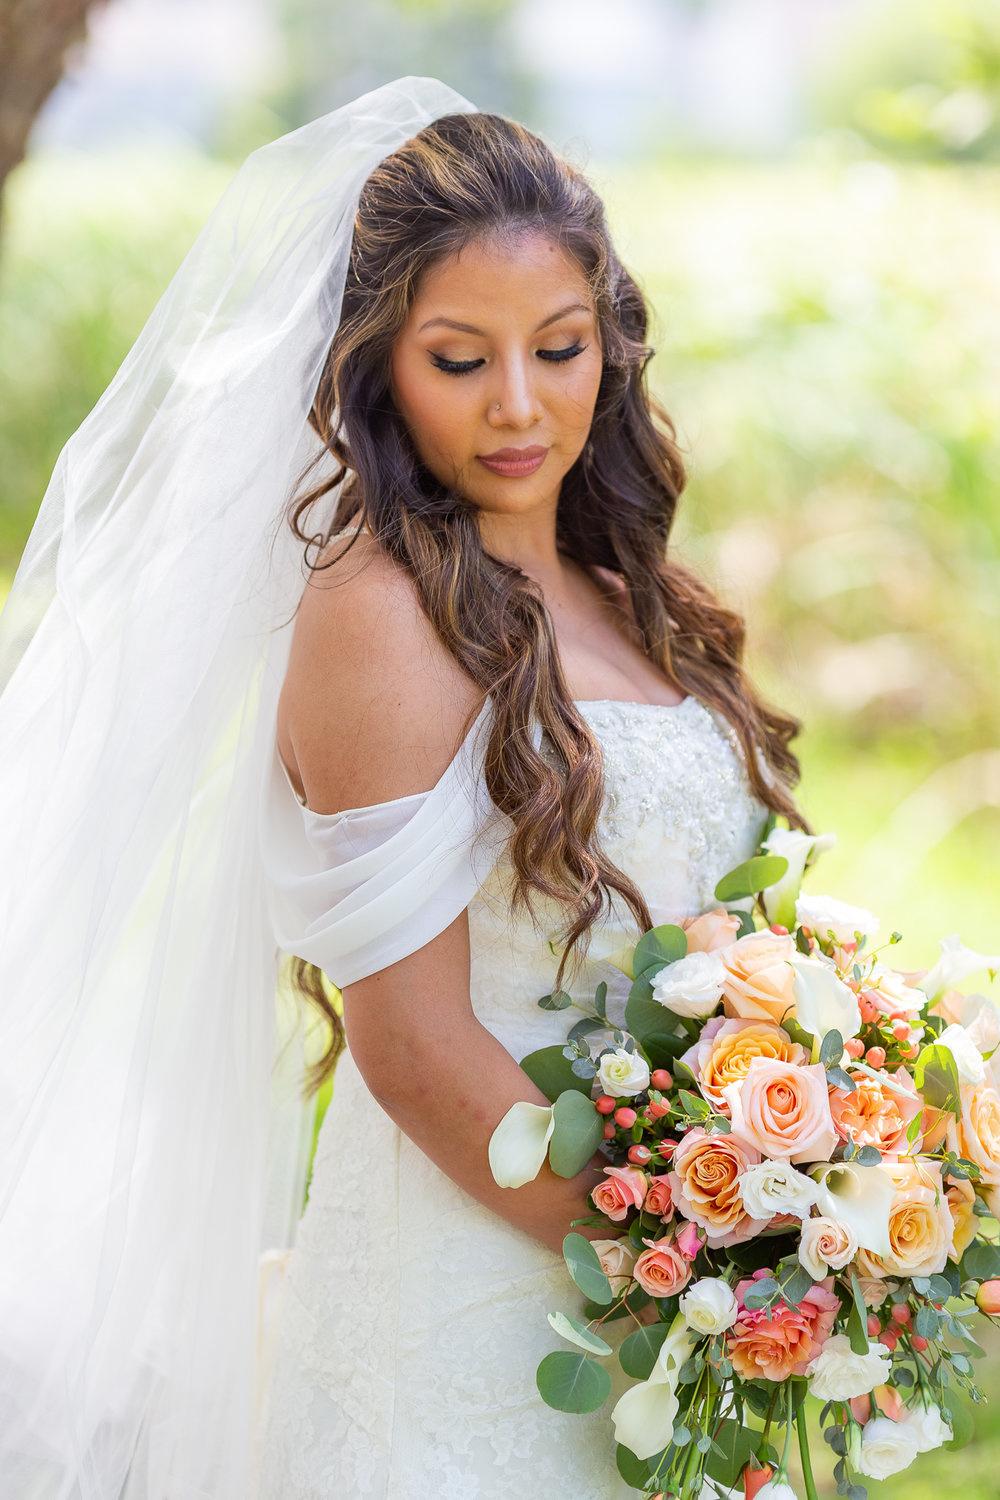 How to Attach the Wedding Veil to Your Hair: Best Tips – One Blushing Bride  Custom Wedding Veils